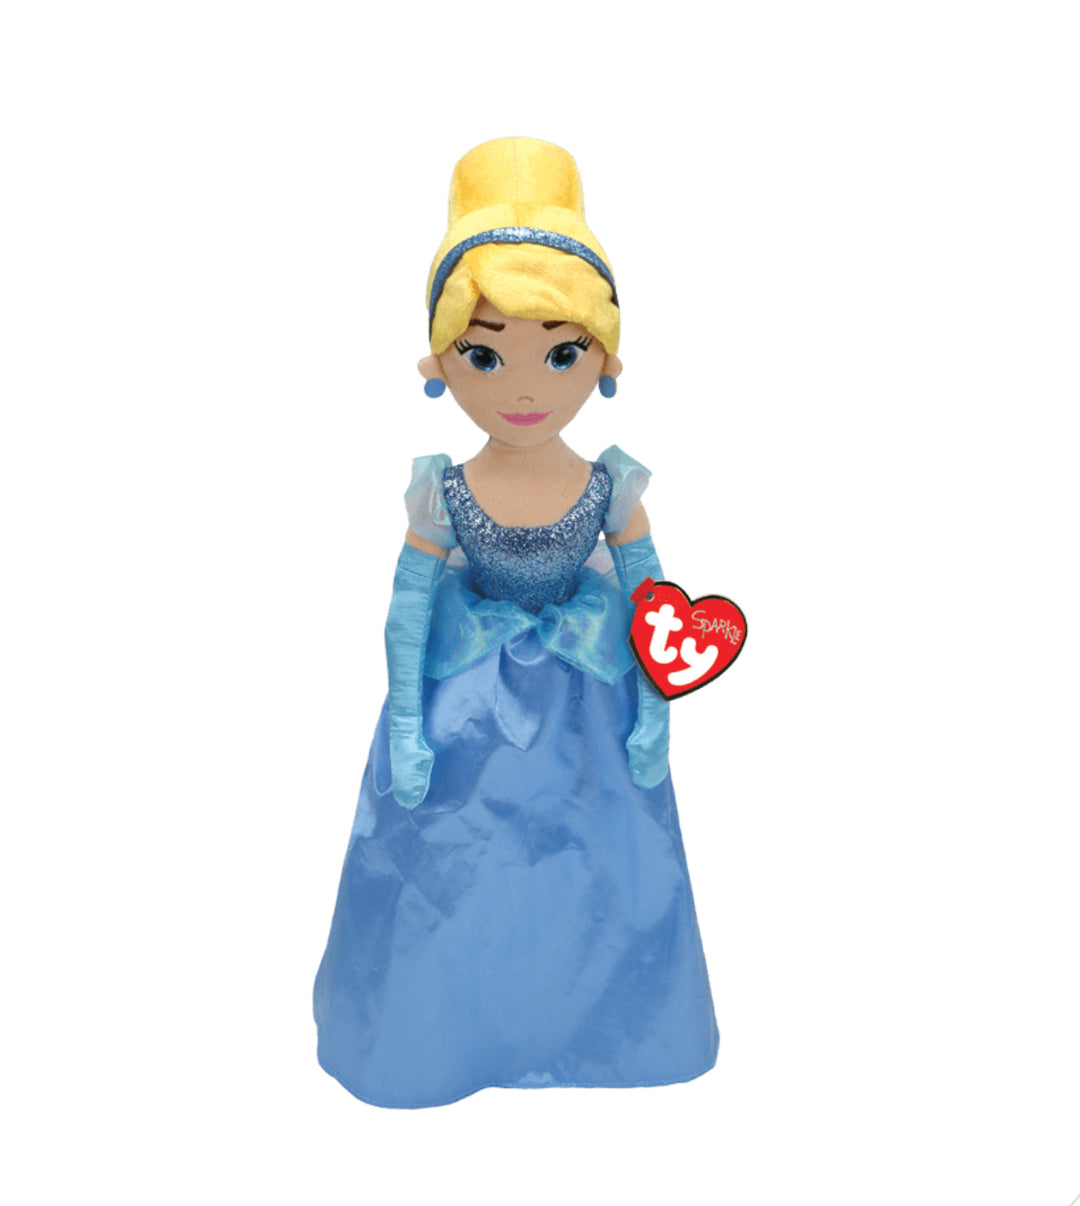 TY Disney Princess Stuffed Animal, Cinderella-240 Kids-Inspired by Justeen-Women's Clothing Boutique in Chicago, Illinois